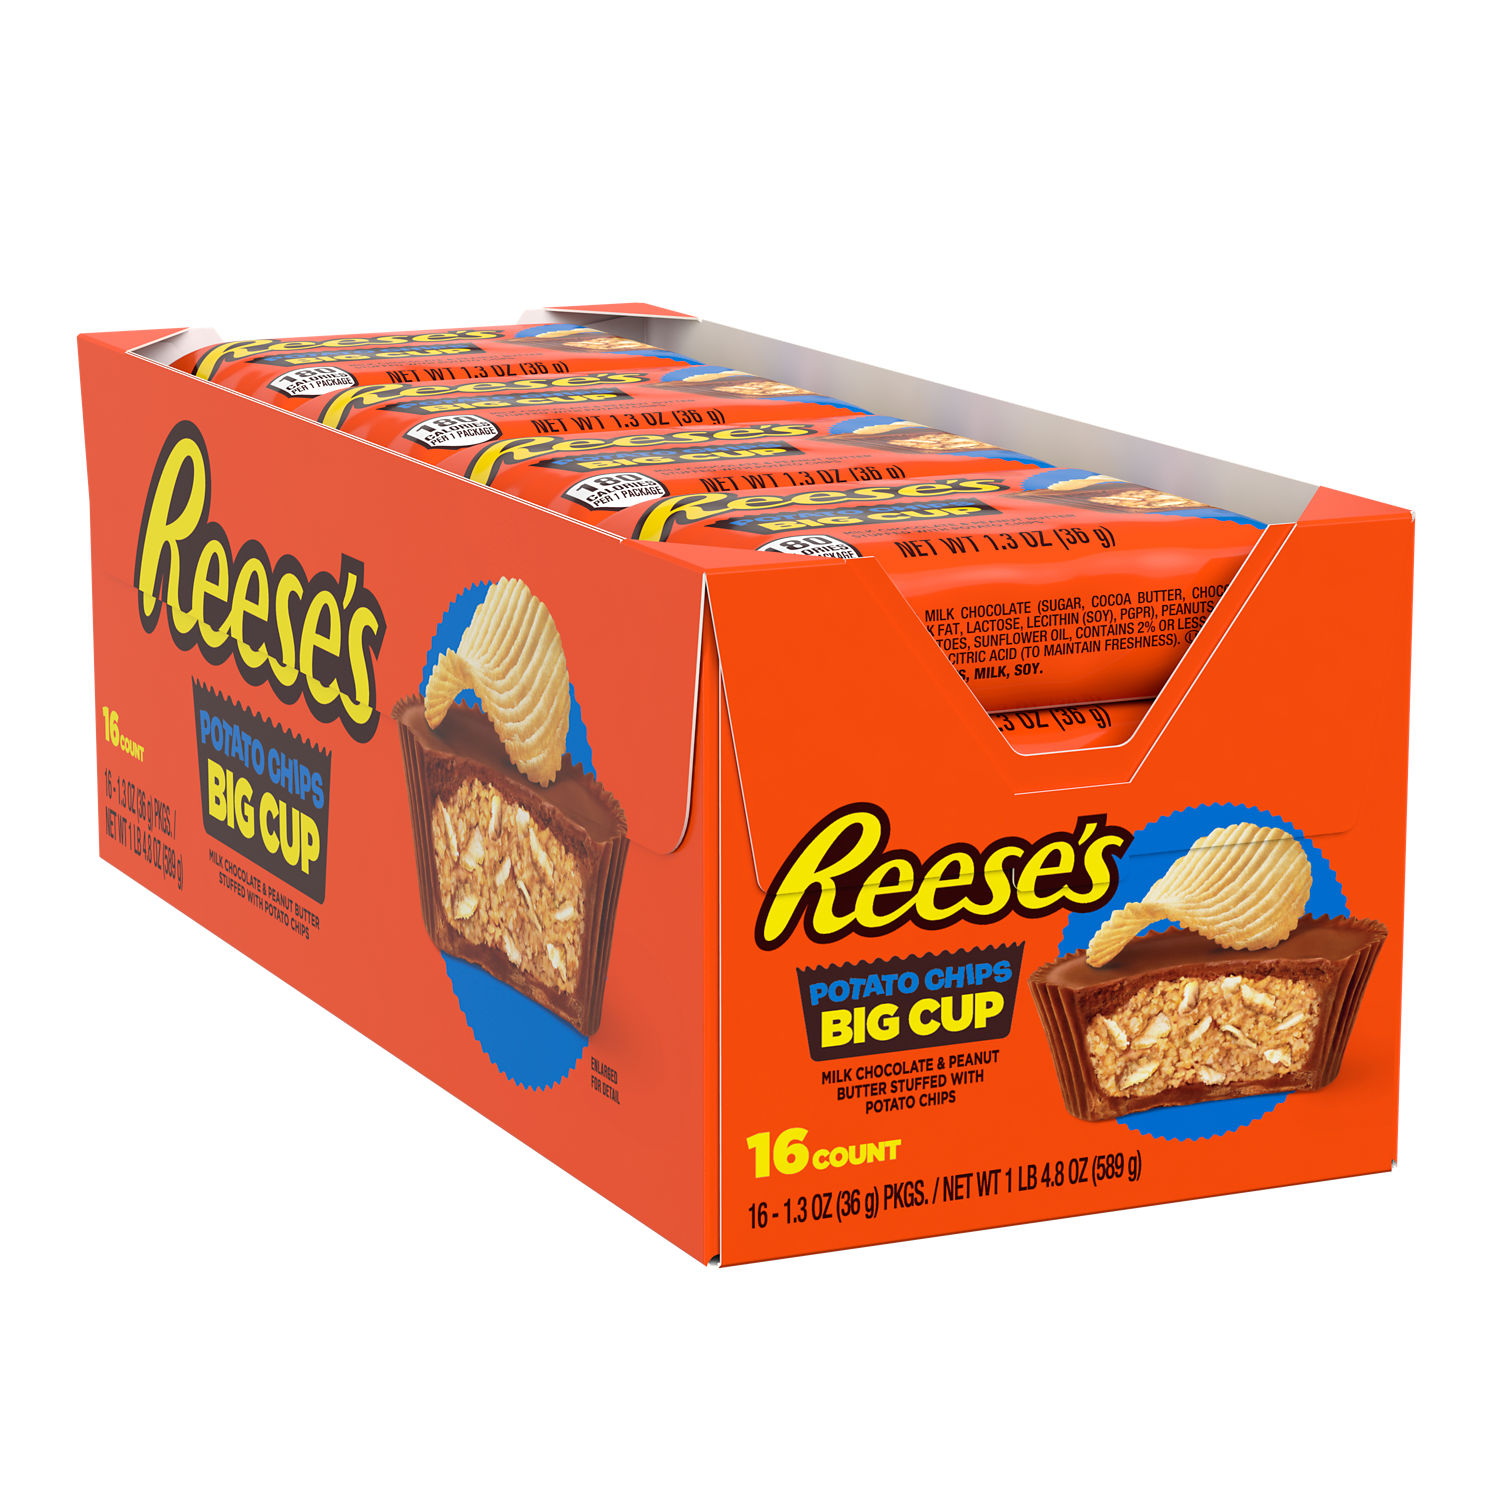 Reese's Peanut Butter Cups, Potato Chips Big Cup - 1.3 oz